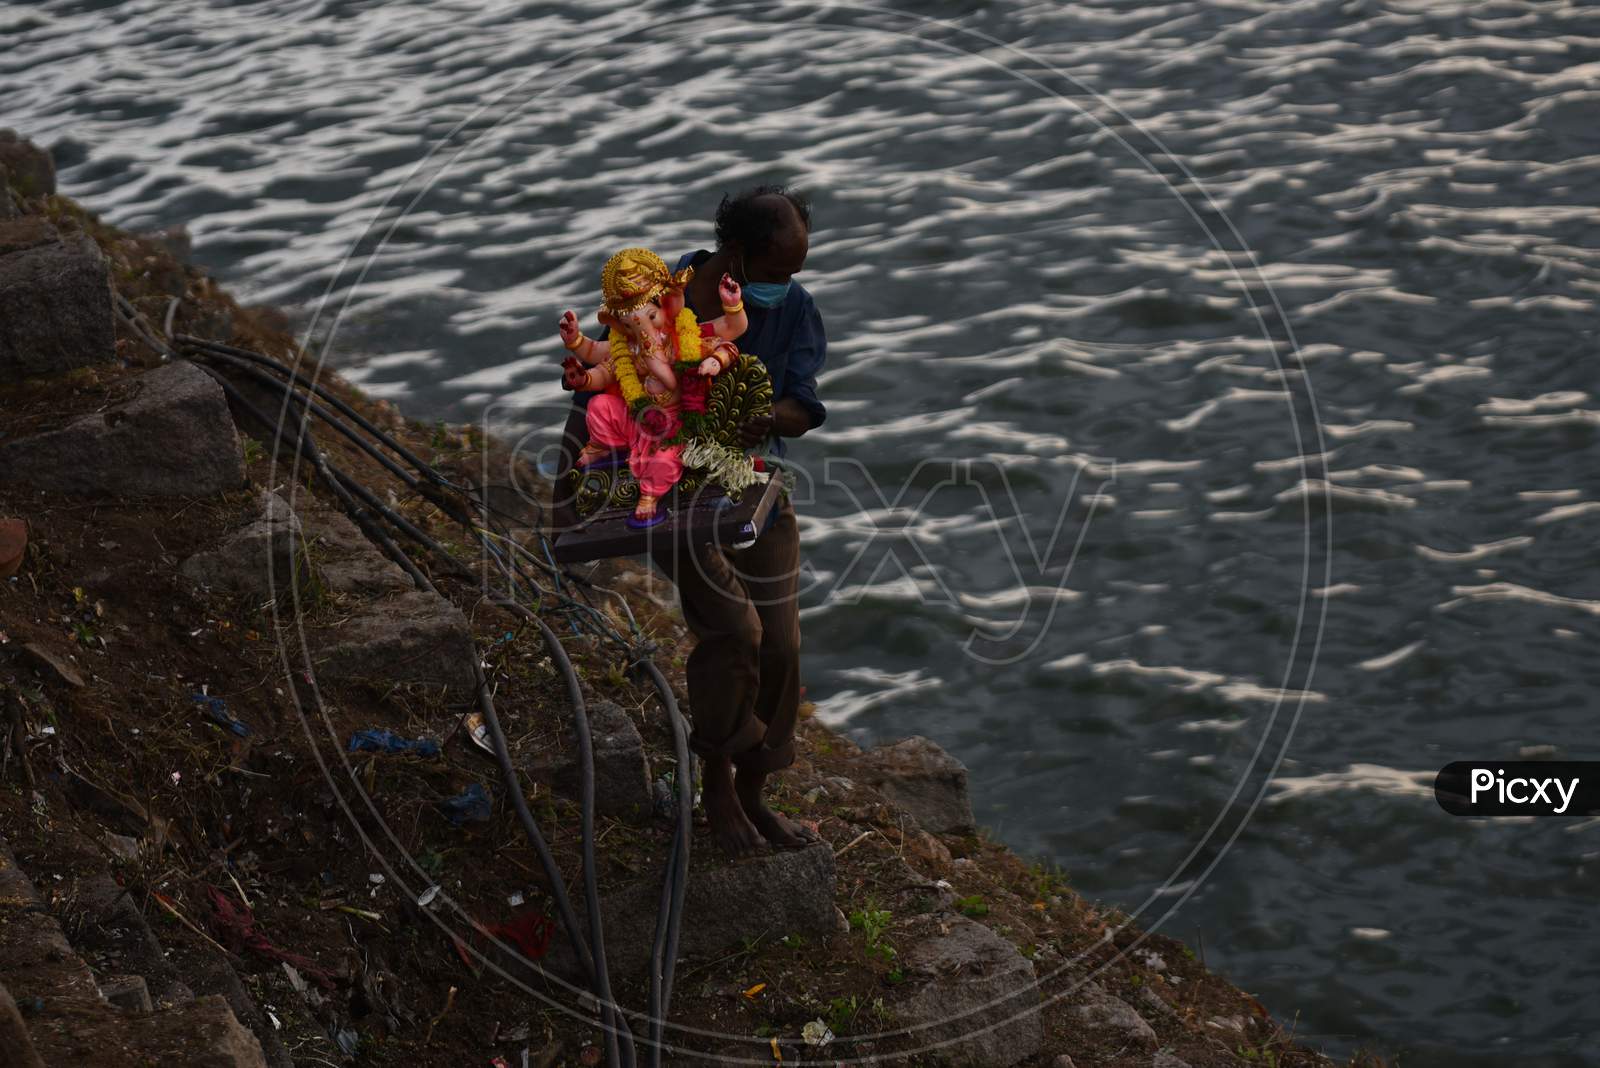 A GHMC worker with a facemask carries the idol of Hindu deity, Lord Ganesh to immerse in Hussain Sagar on August 25, 2020